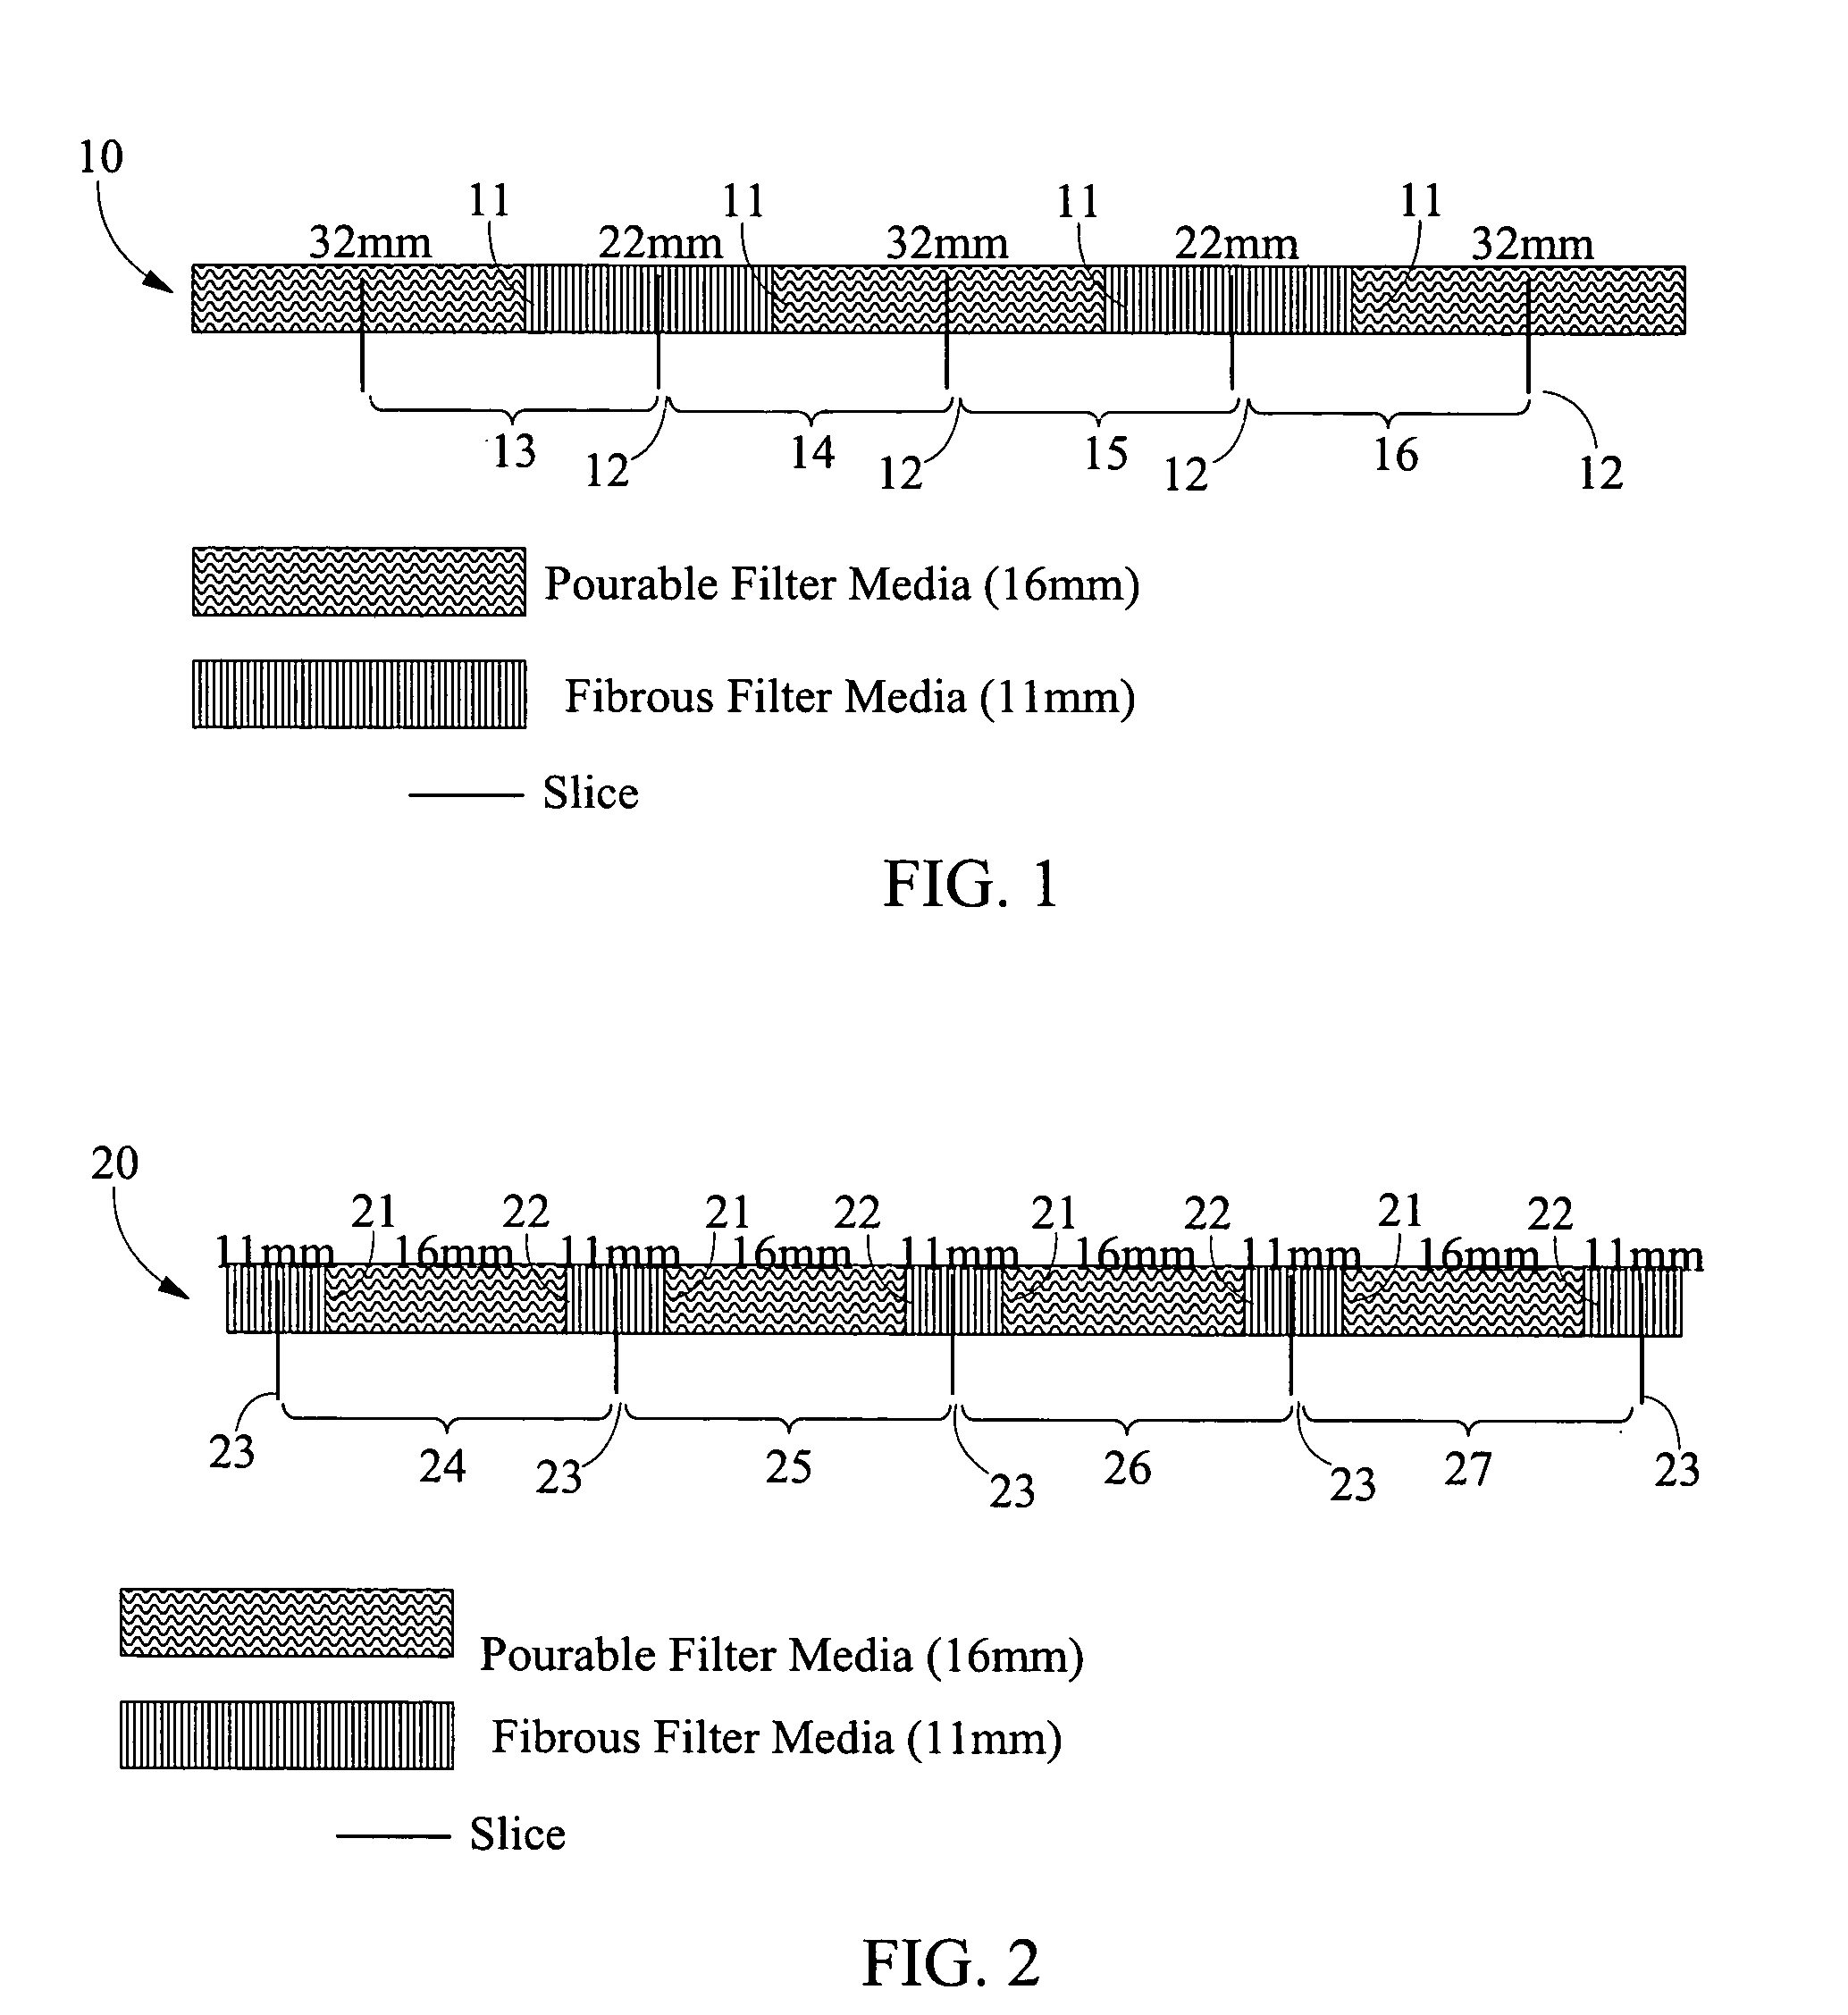 Producing triple section filters using a dual rod filter maker